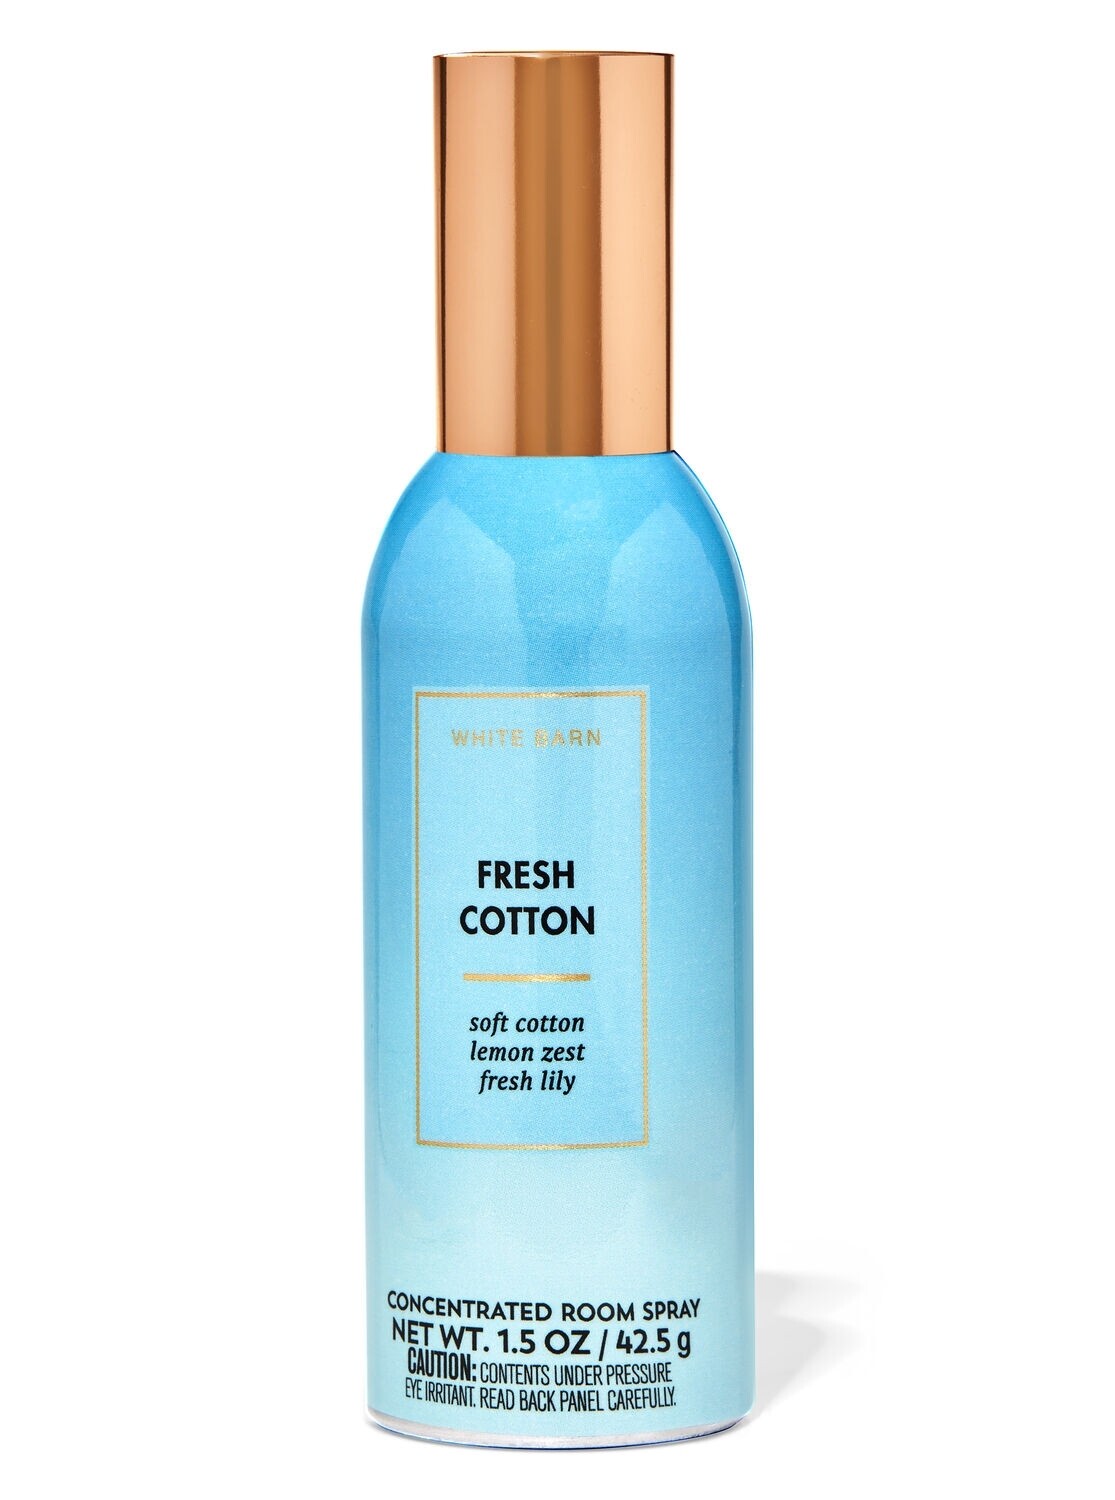 FRESH COTTON-Concentrated Room Spray